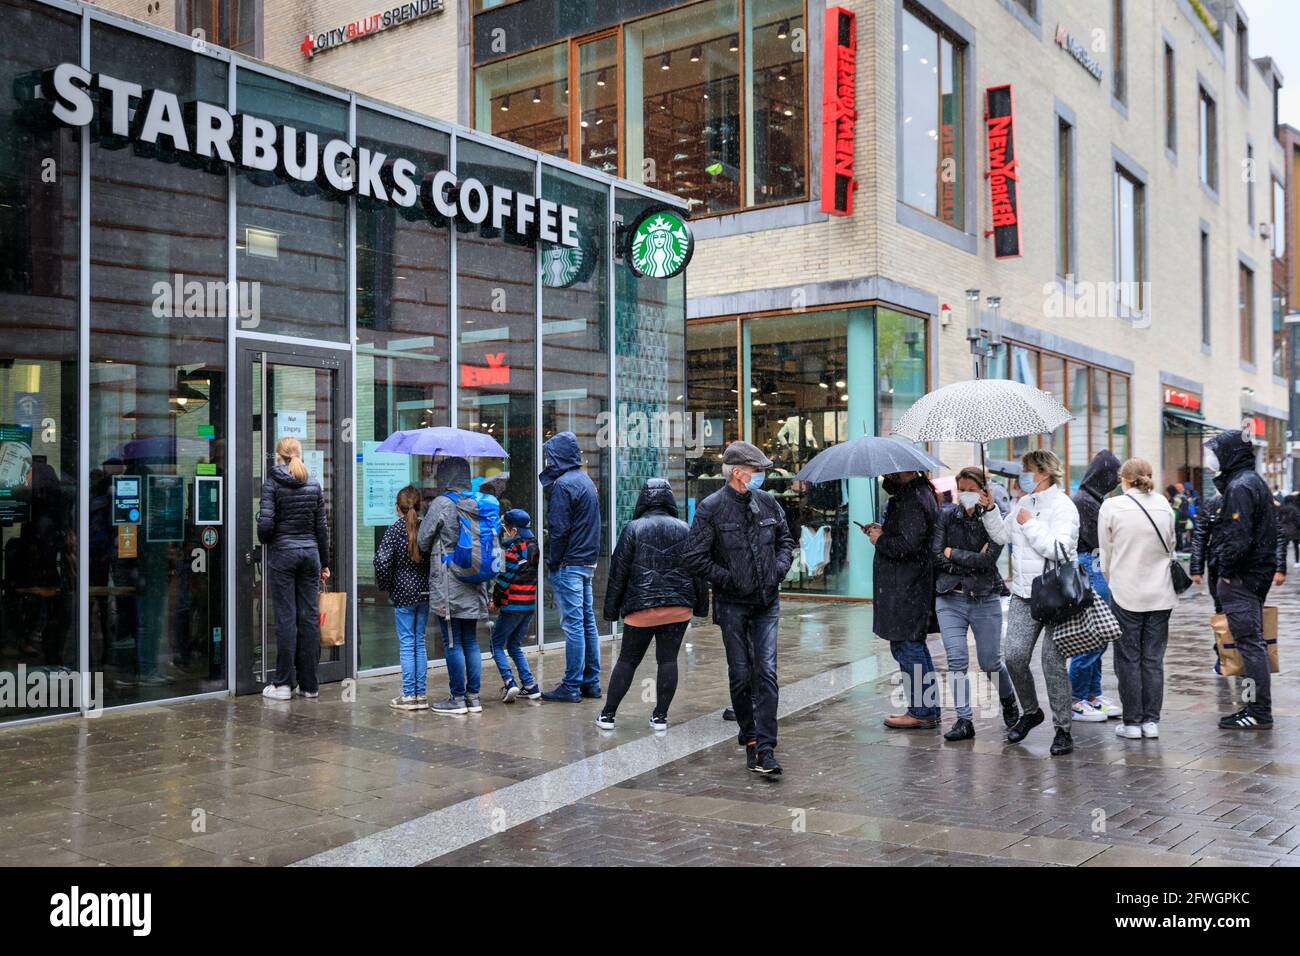 Münster, NRW, Germany. 22nd May, 2021. Queues to sit inside a Starbucks coffee shop. Crowds gather in the historic city centre of Münster, despite heavy rain, as it becomes the first city in North Rhine-Westphalia to be allowed to open up indoor drinking and dining (with negative test or vaccination), and shopping without a test or appointment (but numbers are restricted). Münster currently has one of the lowest covid incidence rates in NRW at 17/100k and has become a 'model region' to trial slow re-opening of hospitality venues. Credit: Imageplotter/Alamy Live News Stock Photo